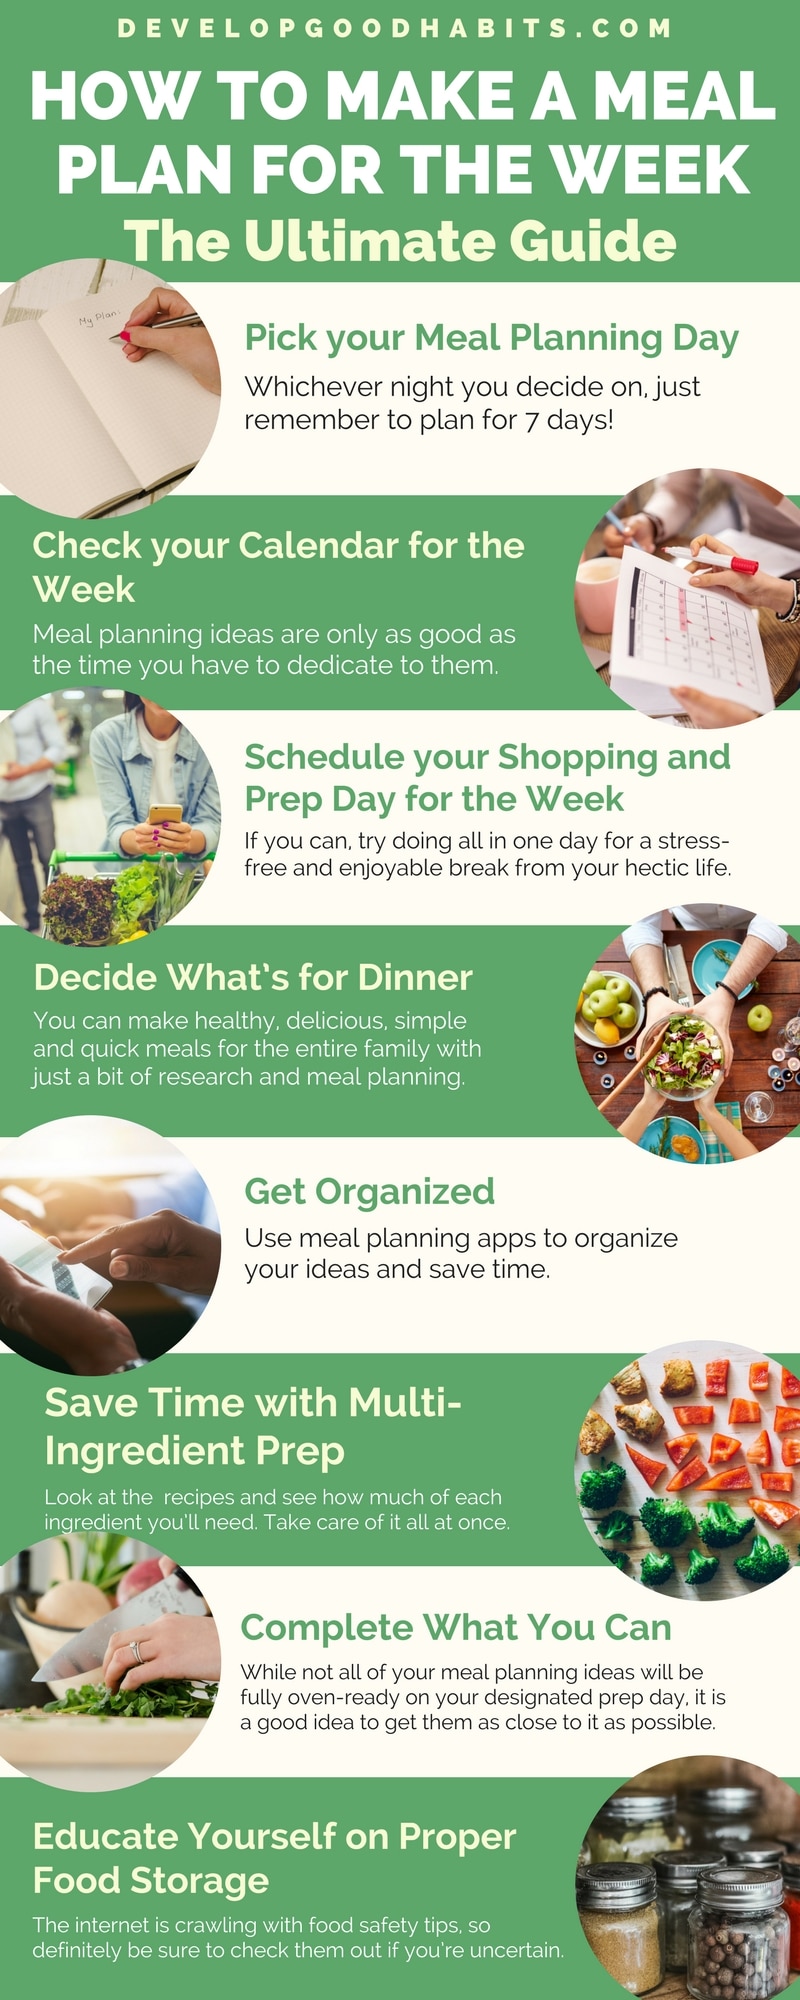 Learn How to Make a Meal Plan for the Weekin this ultimate guide on meal planning. #mealplanning #healthy #healthyeating #healthyhabits #nutrition #healthylife #fitnessgoals